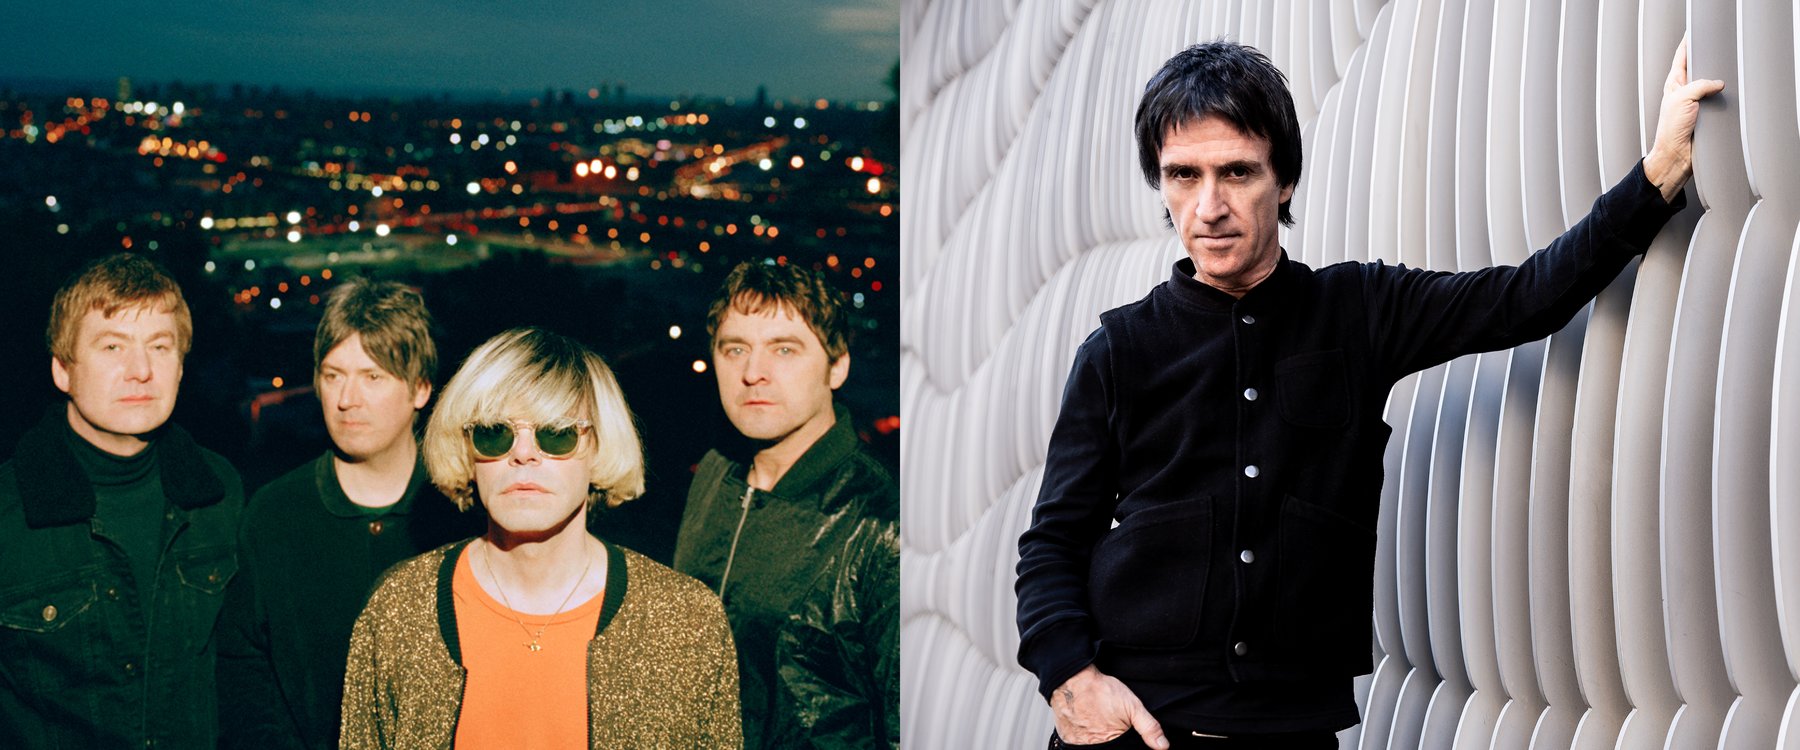 The Charlatans and Johnny Marr announce joint headline show for Forest Live at Cannock Chase Forest